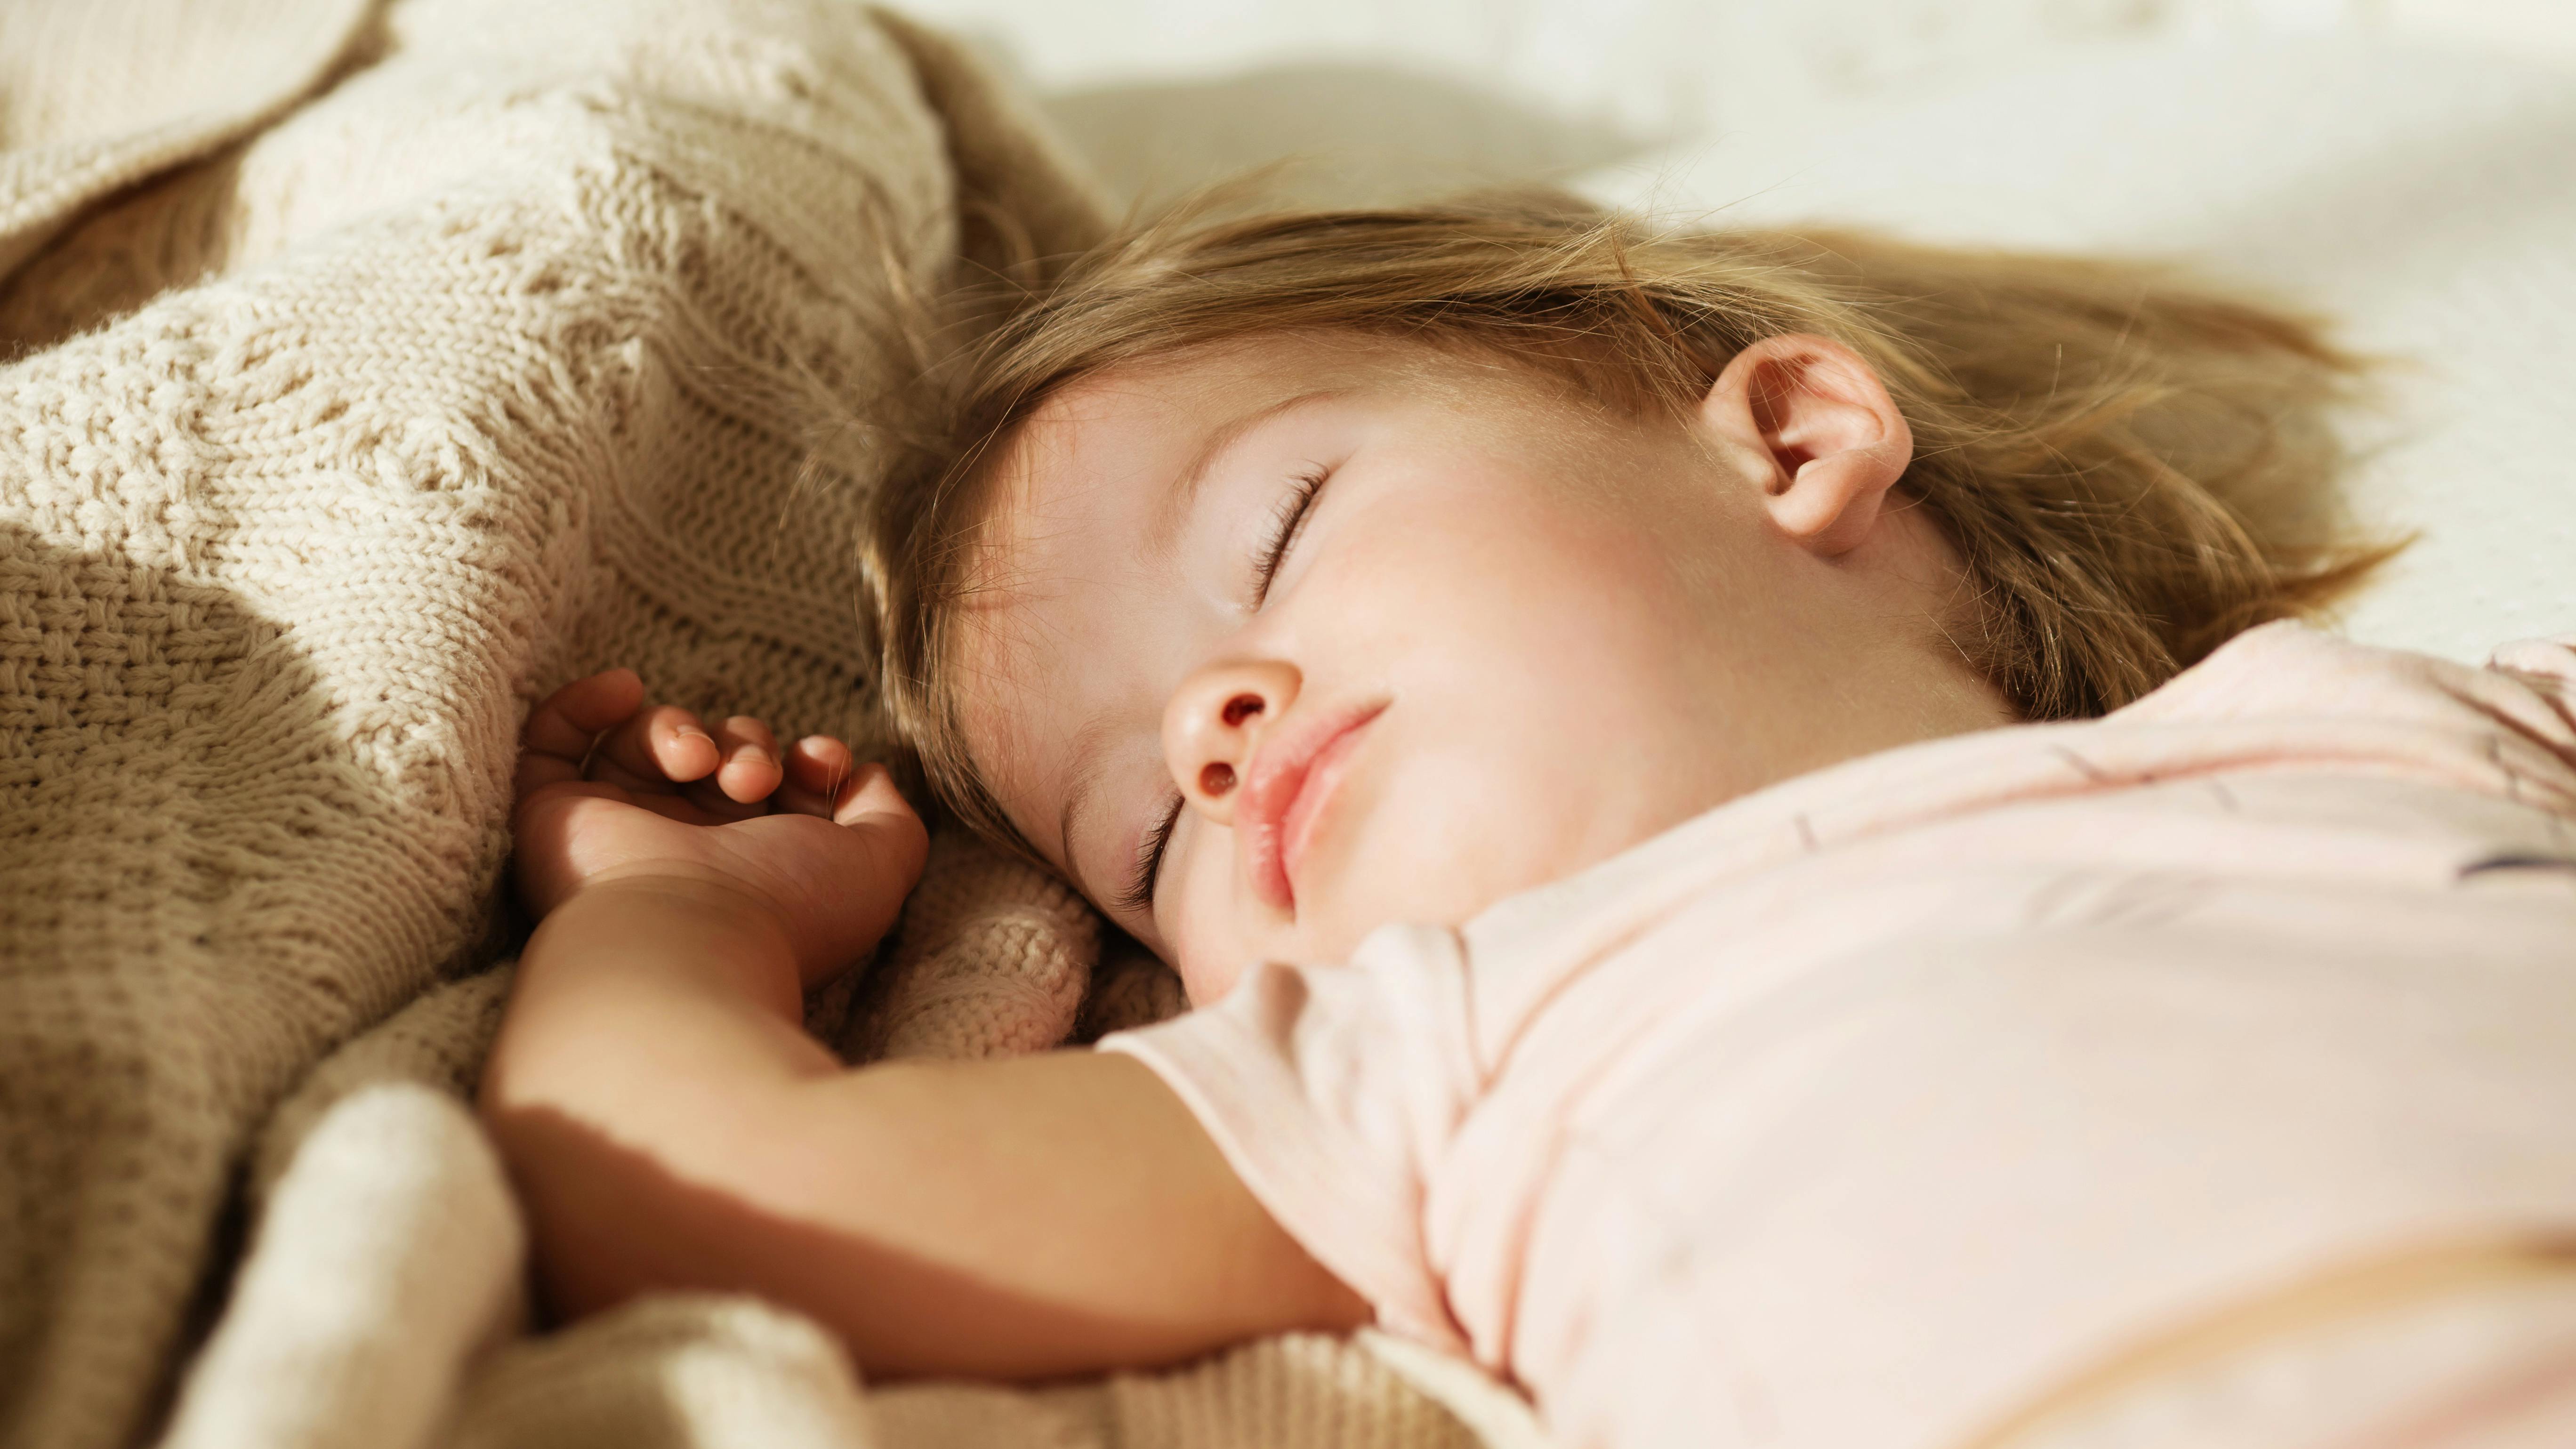 Sleeping little girl. Carefree sleep little baby with a soft toy on the bed. Close-up portrait of a beautiful sleeping child on knitted blanket. Sweet dreams